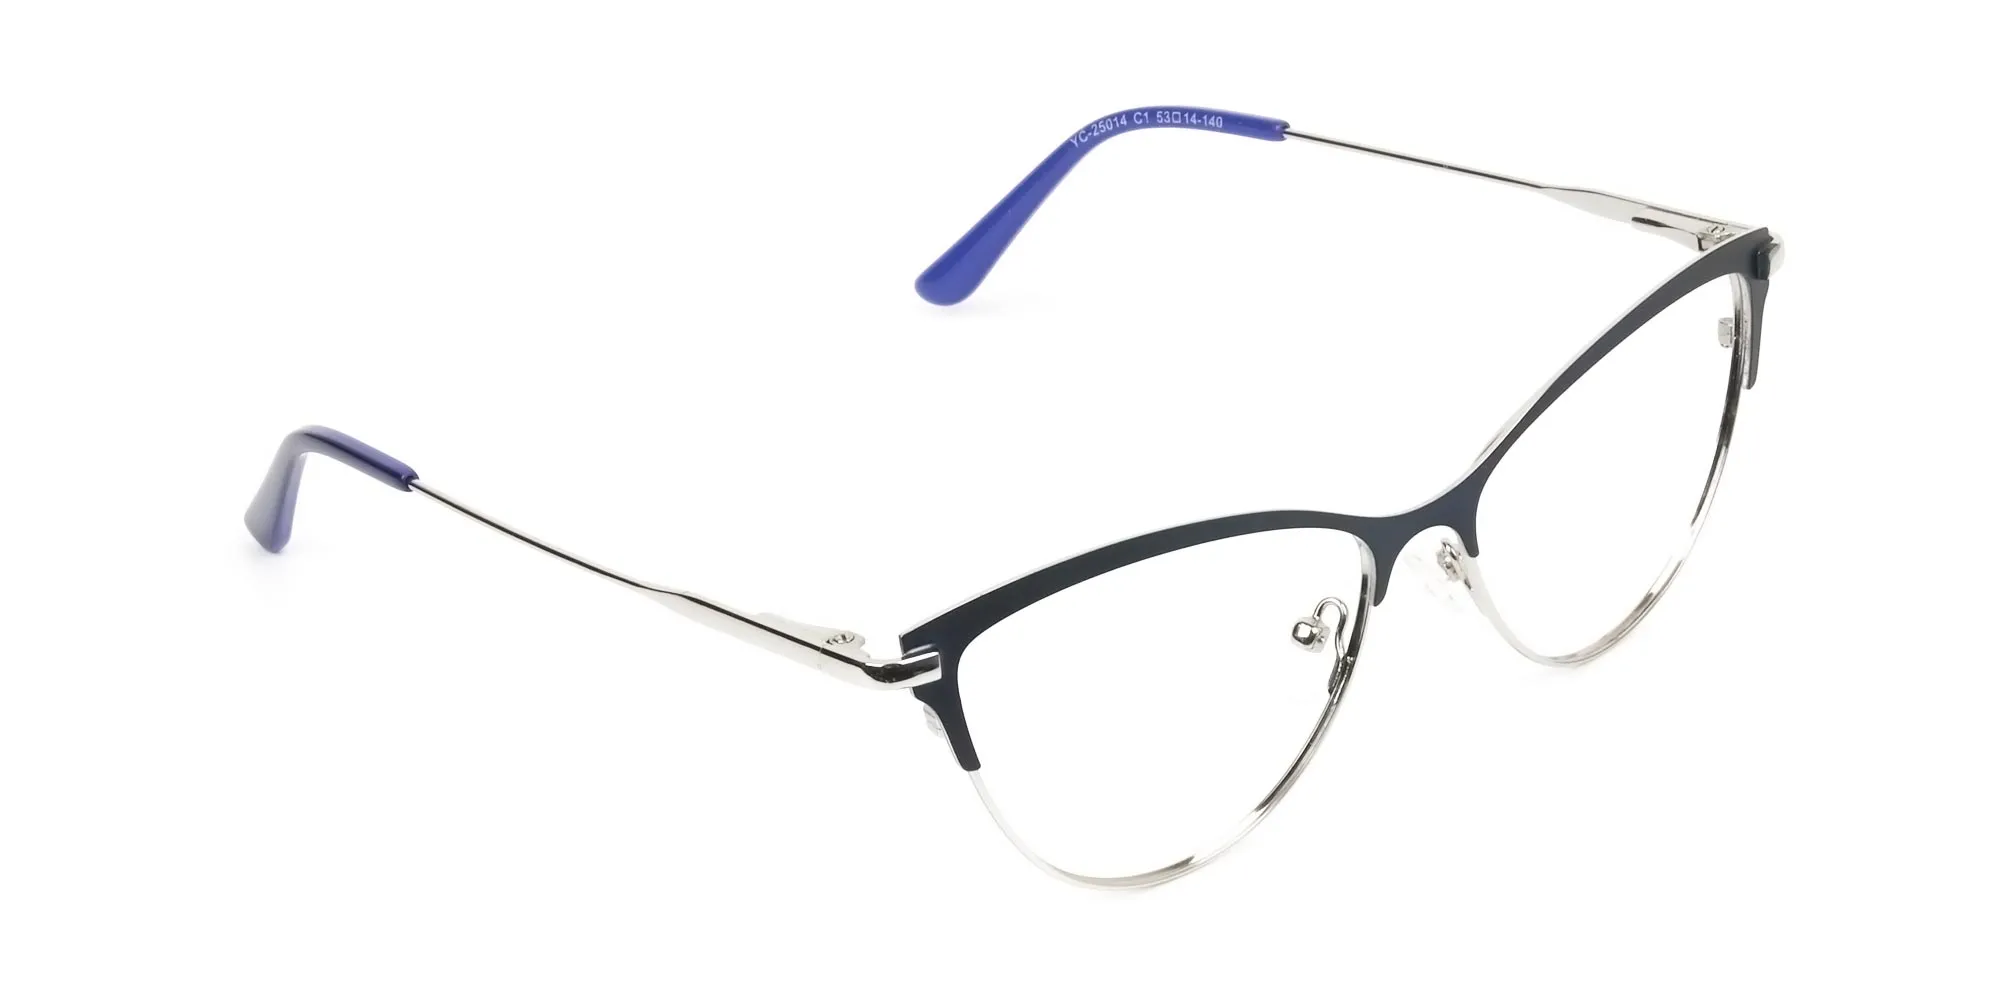 Navy Blue and Silver Metal Cat Eye Glasses - 2